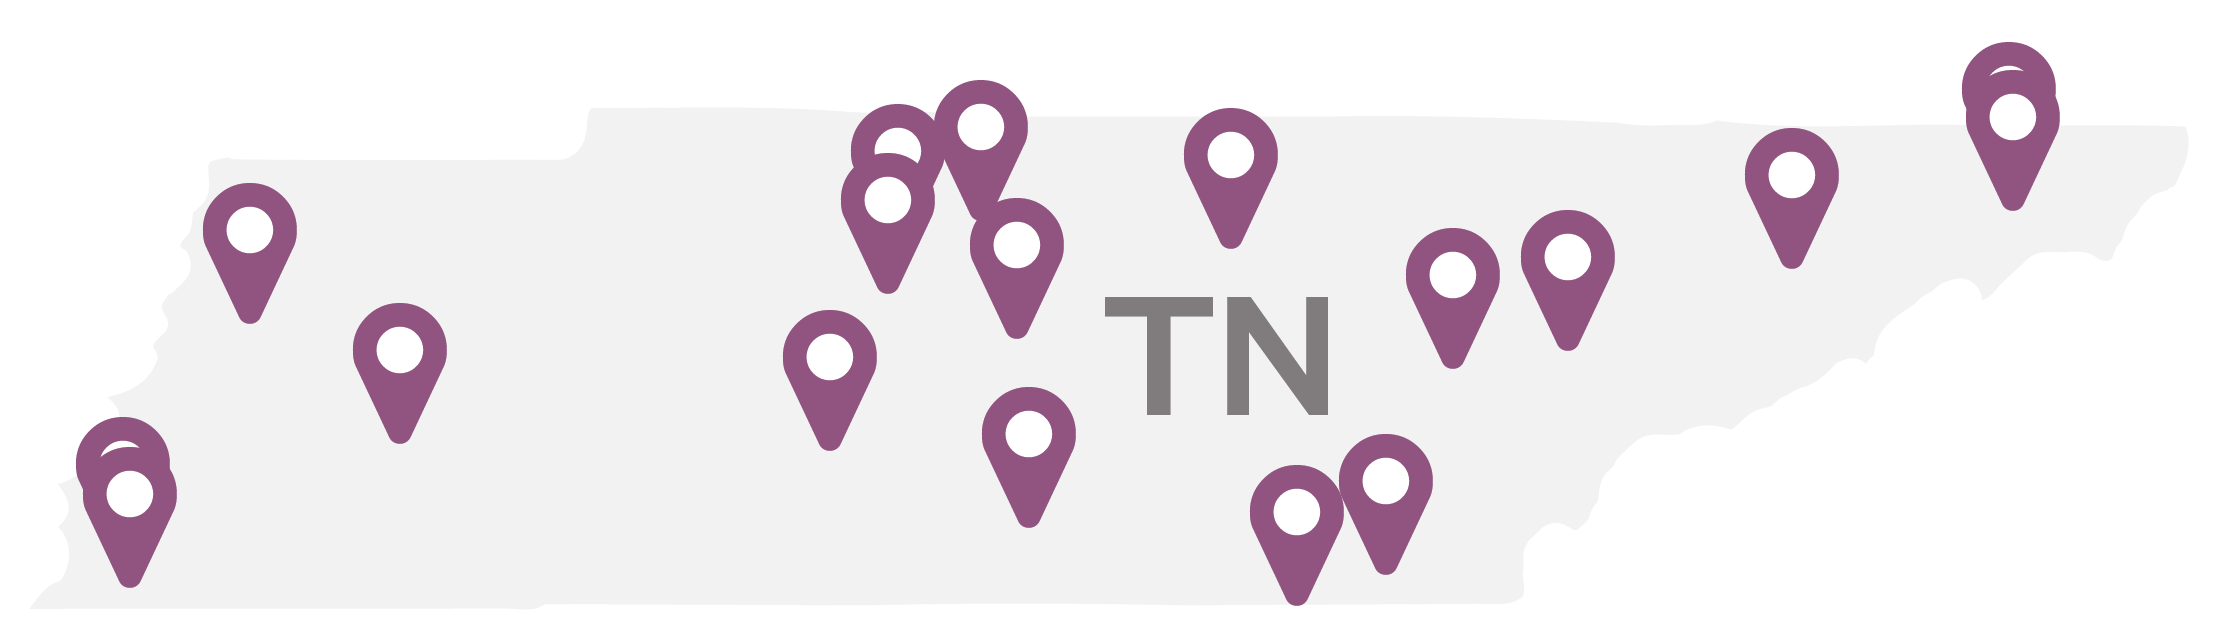 A map of Tennessee with purple flags marking the colleges in this study